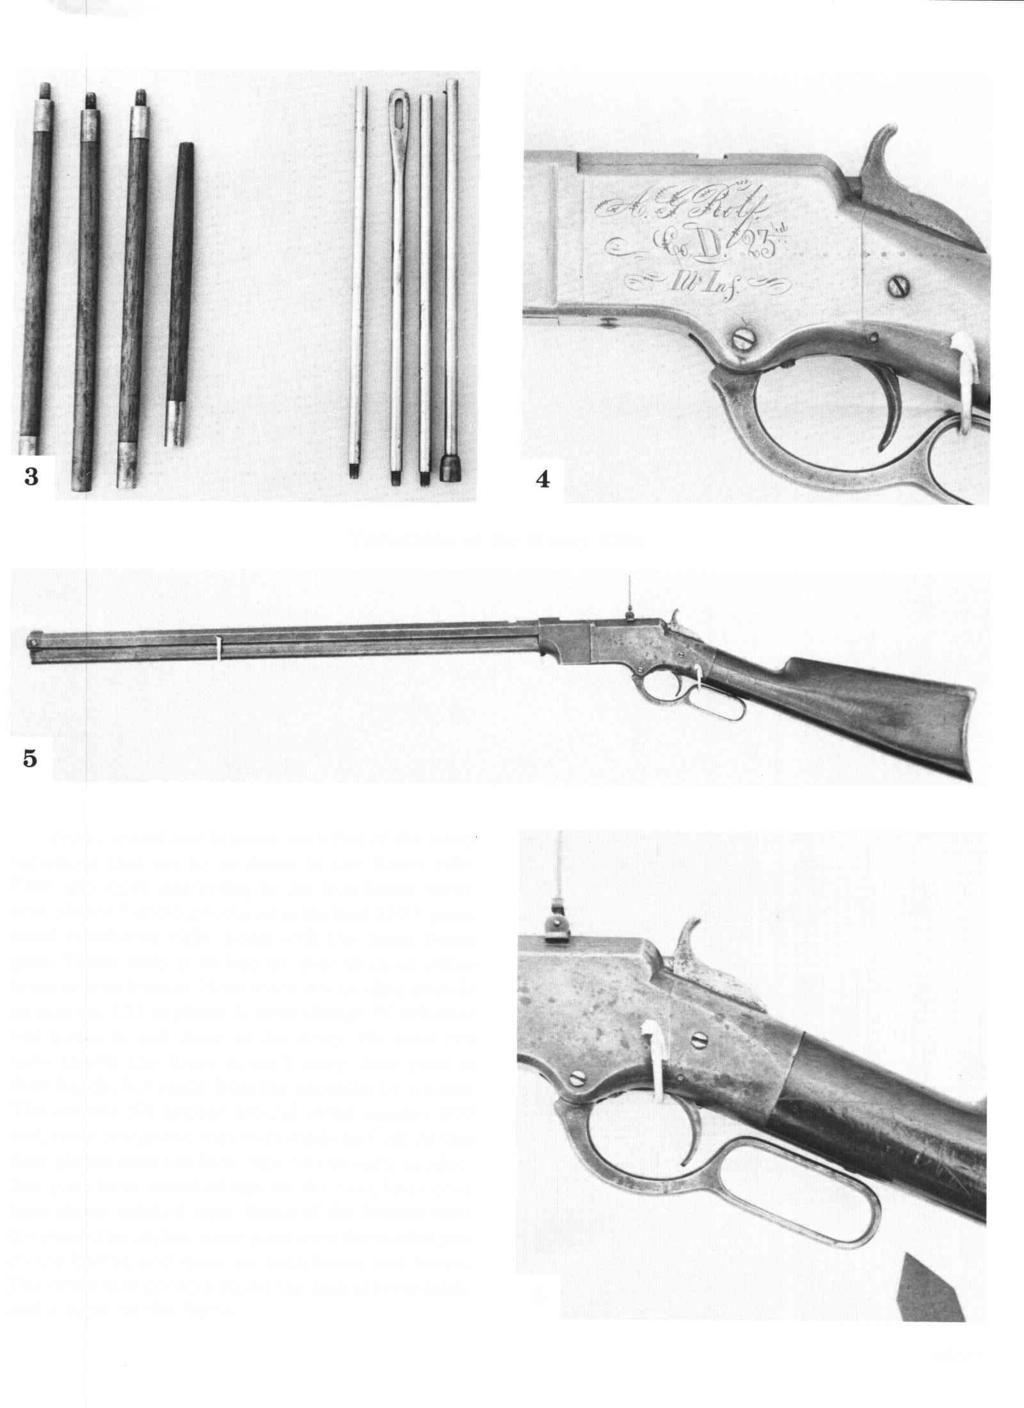 Now I would like to point out a few of the many variations that are to be found in the Henry rifle.